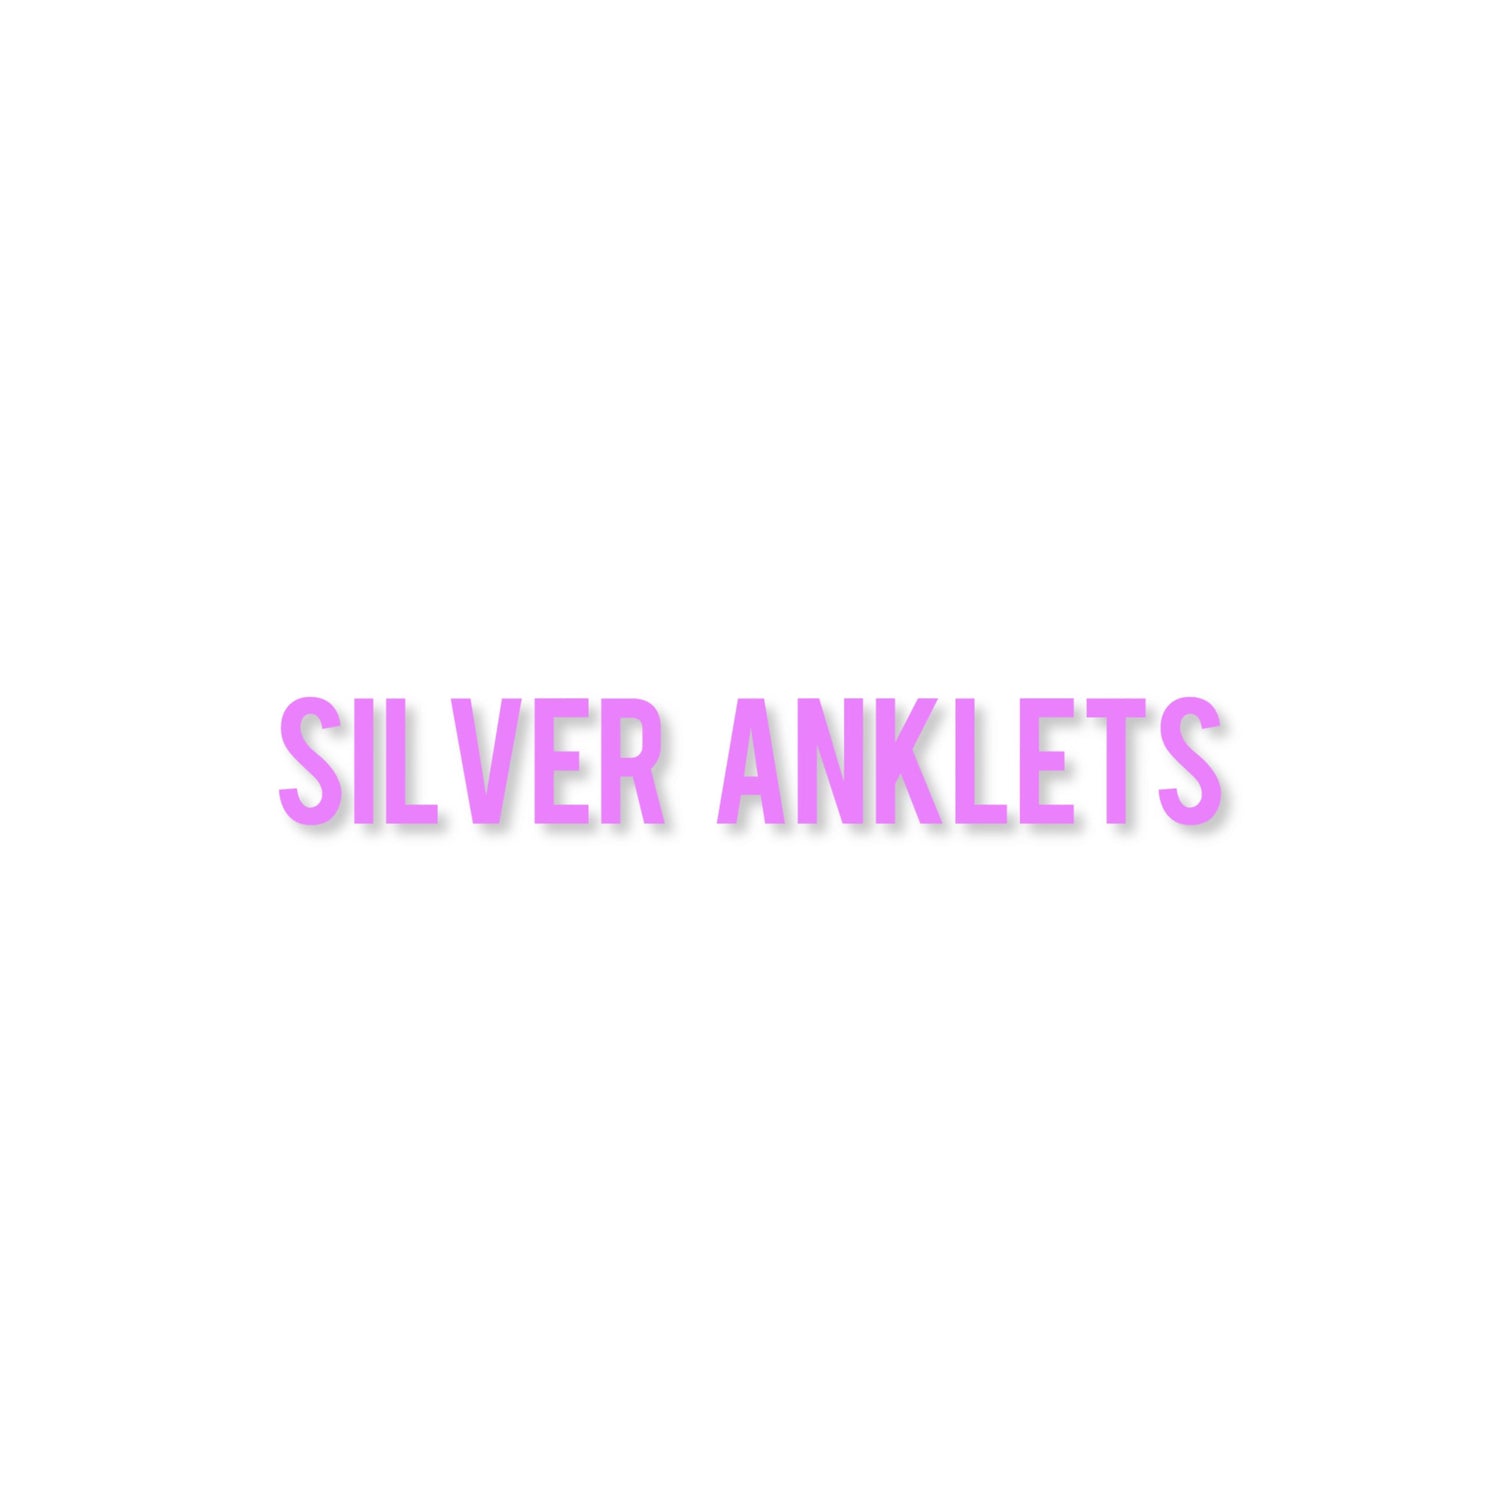 SILVER ANKLETS